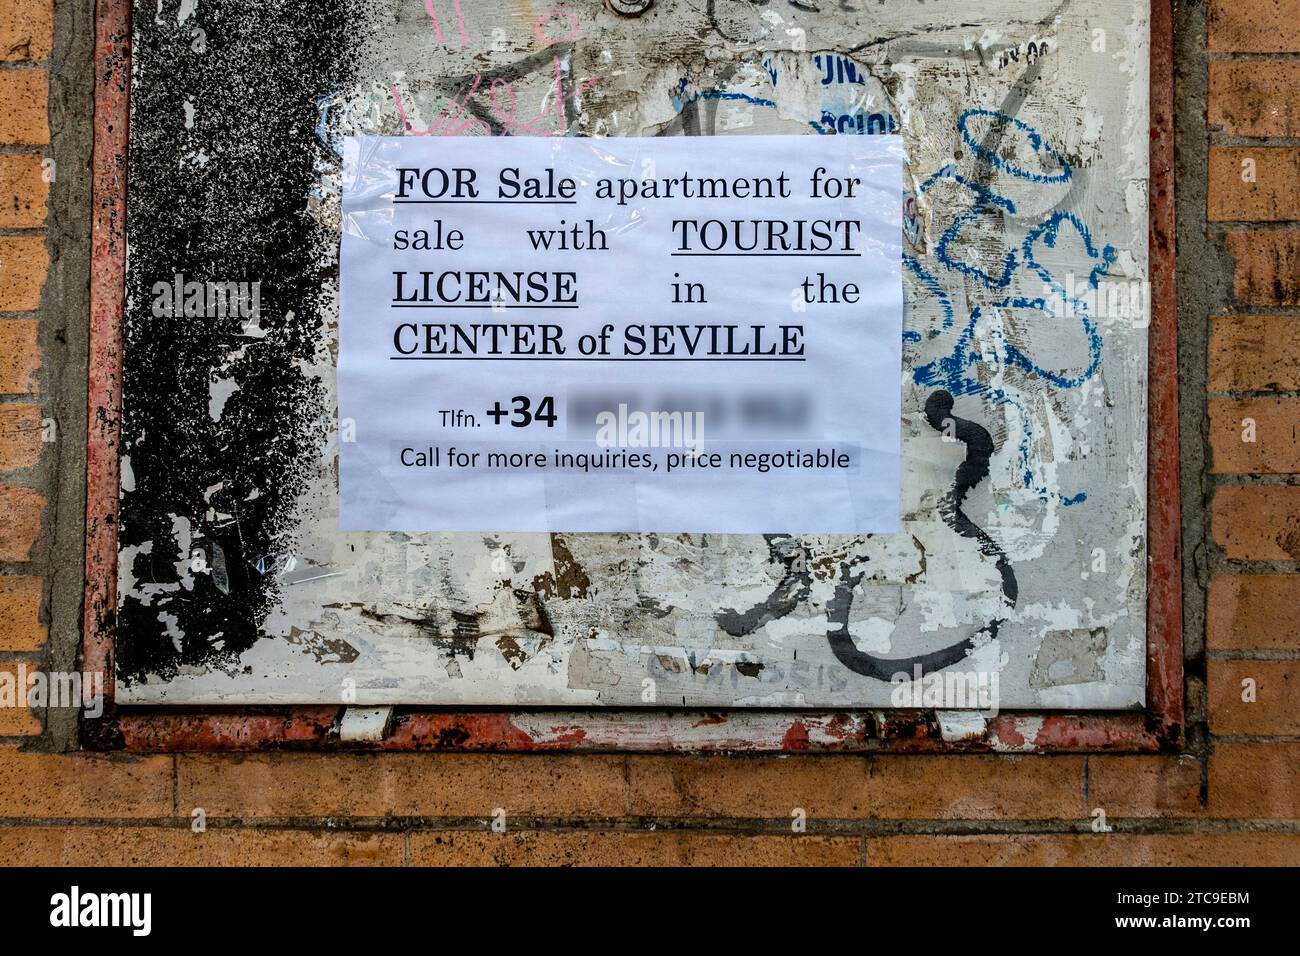 Posted apartment sale sign with tourist license in Seville., Spain. Stock Photo